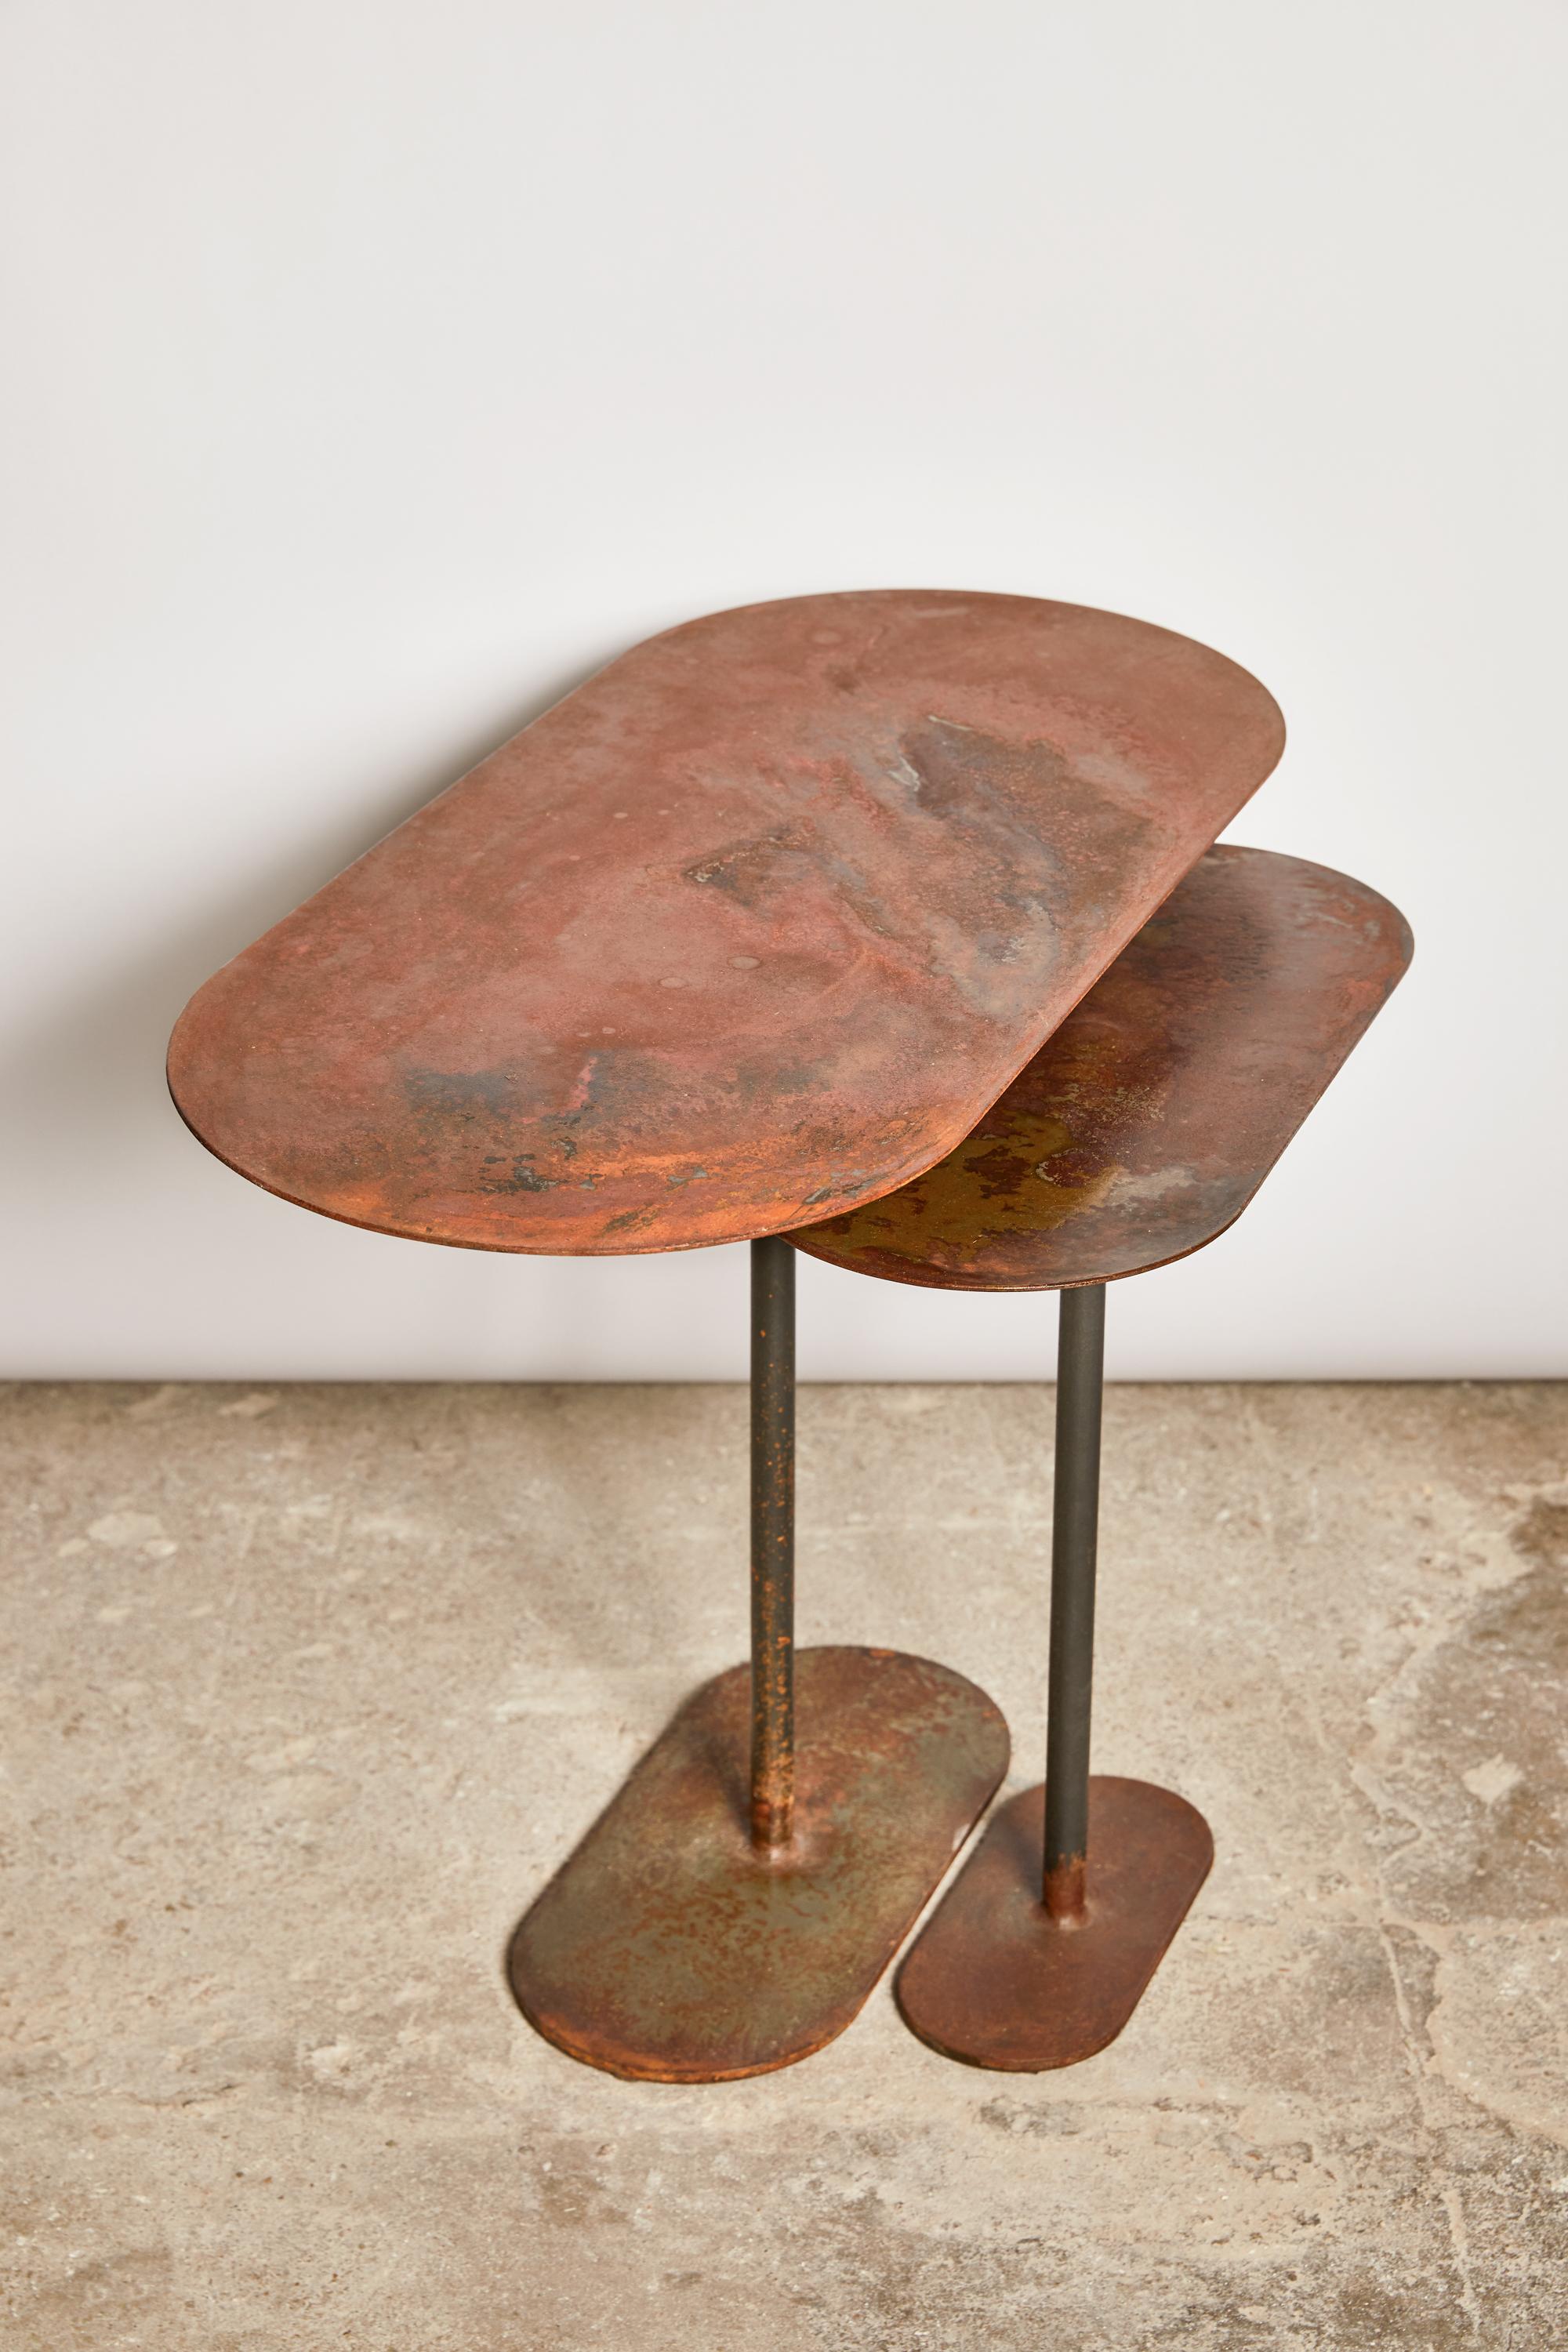 Pair of oxidized ellipses table signed by Pia Chevalier
Oxidized steel.
Dimensions:
Large 60 x 27 cm H. 45 cm
Small 40 x 18 cm H. 40 cm

Pia Chevalier is a French contemporary designer.
Independent Designer, trained in Design and Crafts and more